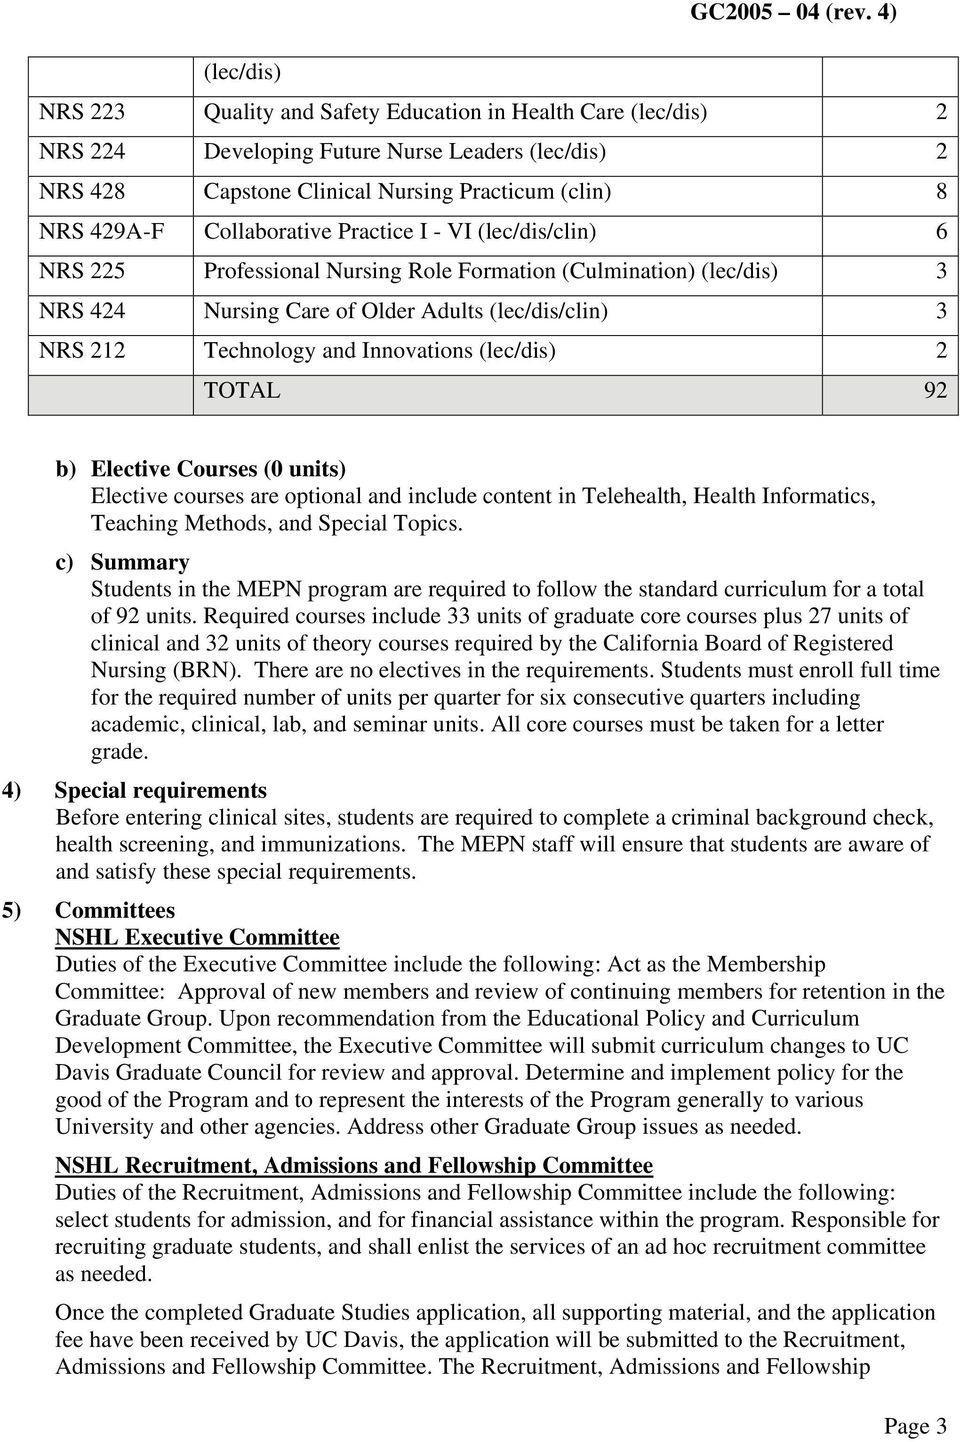 I - VI (lec/dis/clin) 6 NRS 5 Professional Nursing Role Formation (Culmination) (lec/dis) NRS Nursing Care of Older Adults (lec/dis/clin) NRS Technology and Innovations (lec/dis) TOTAL 9 b) Elective